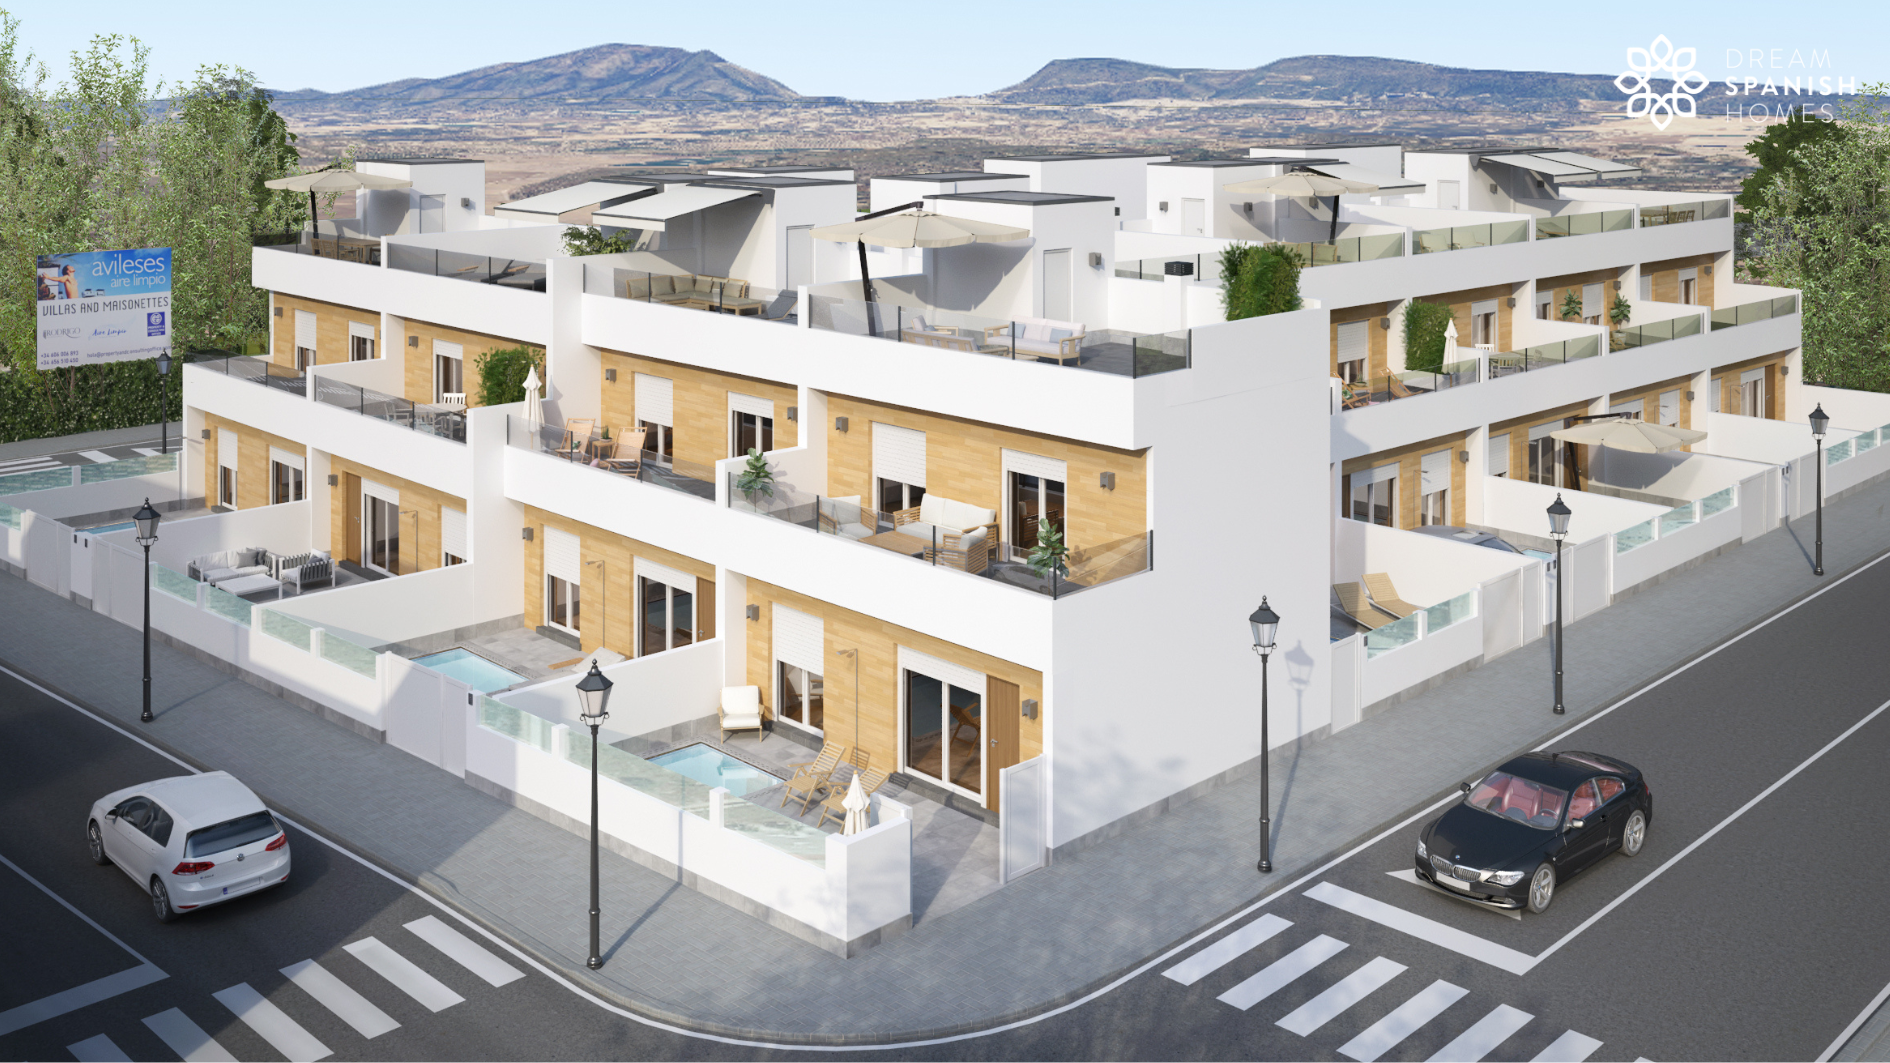 3 Bedroom Townhouses, Residencial Aire Limpio III, Avileses